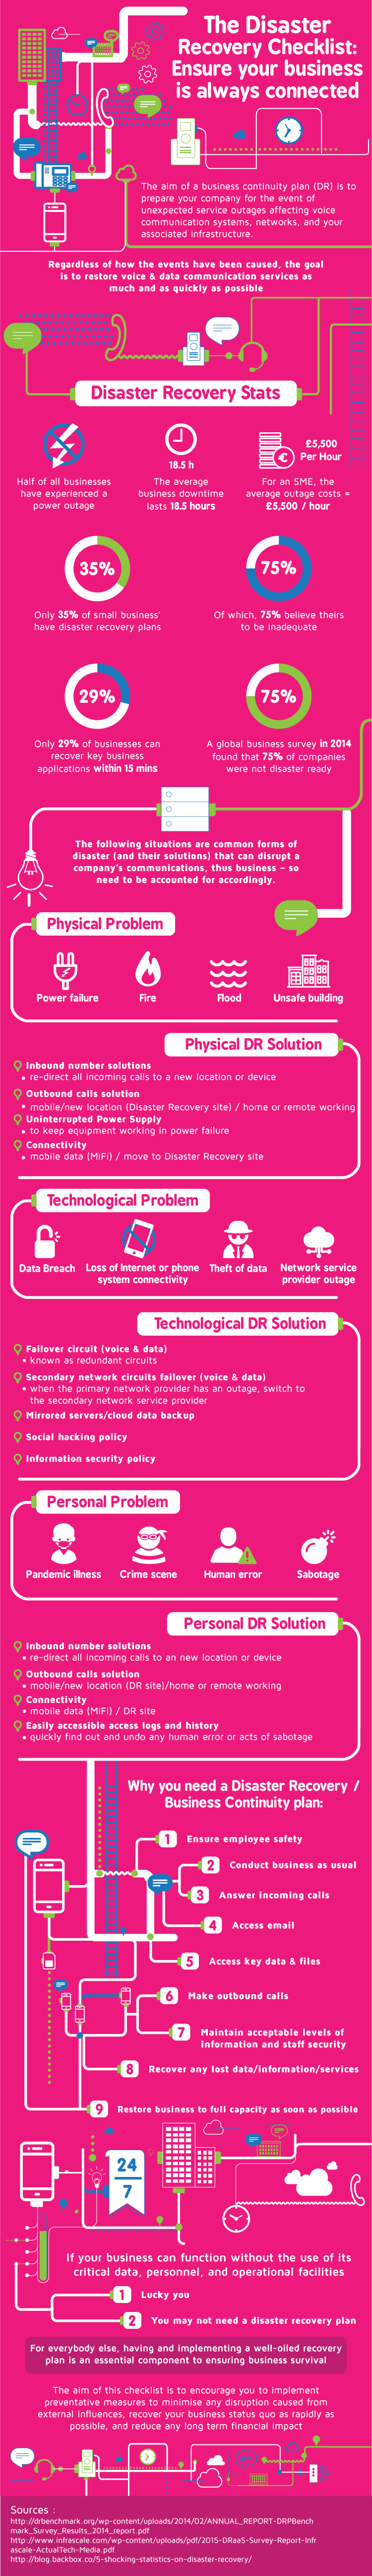 Disaster Recovery: How to Prepare Your Business for Systems Failures [Infographic]